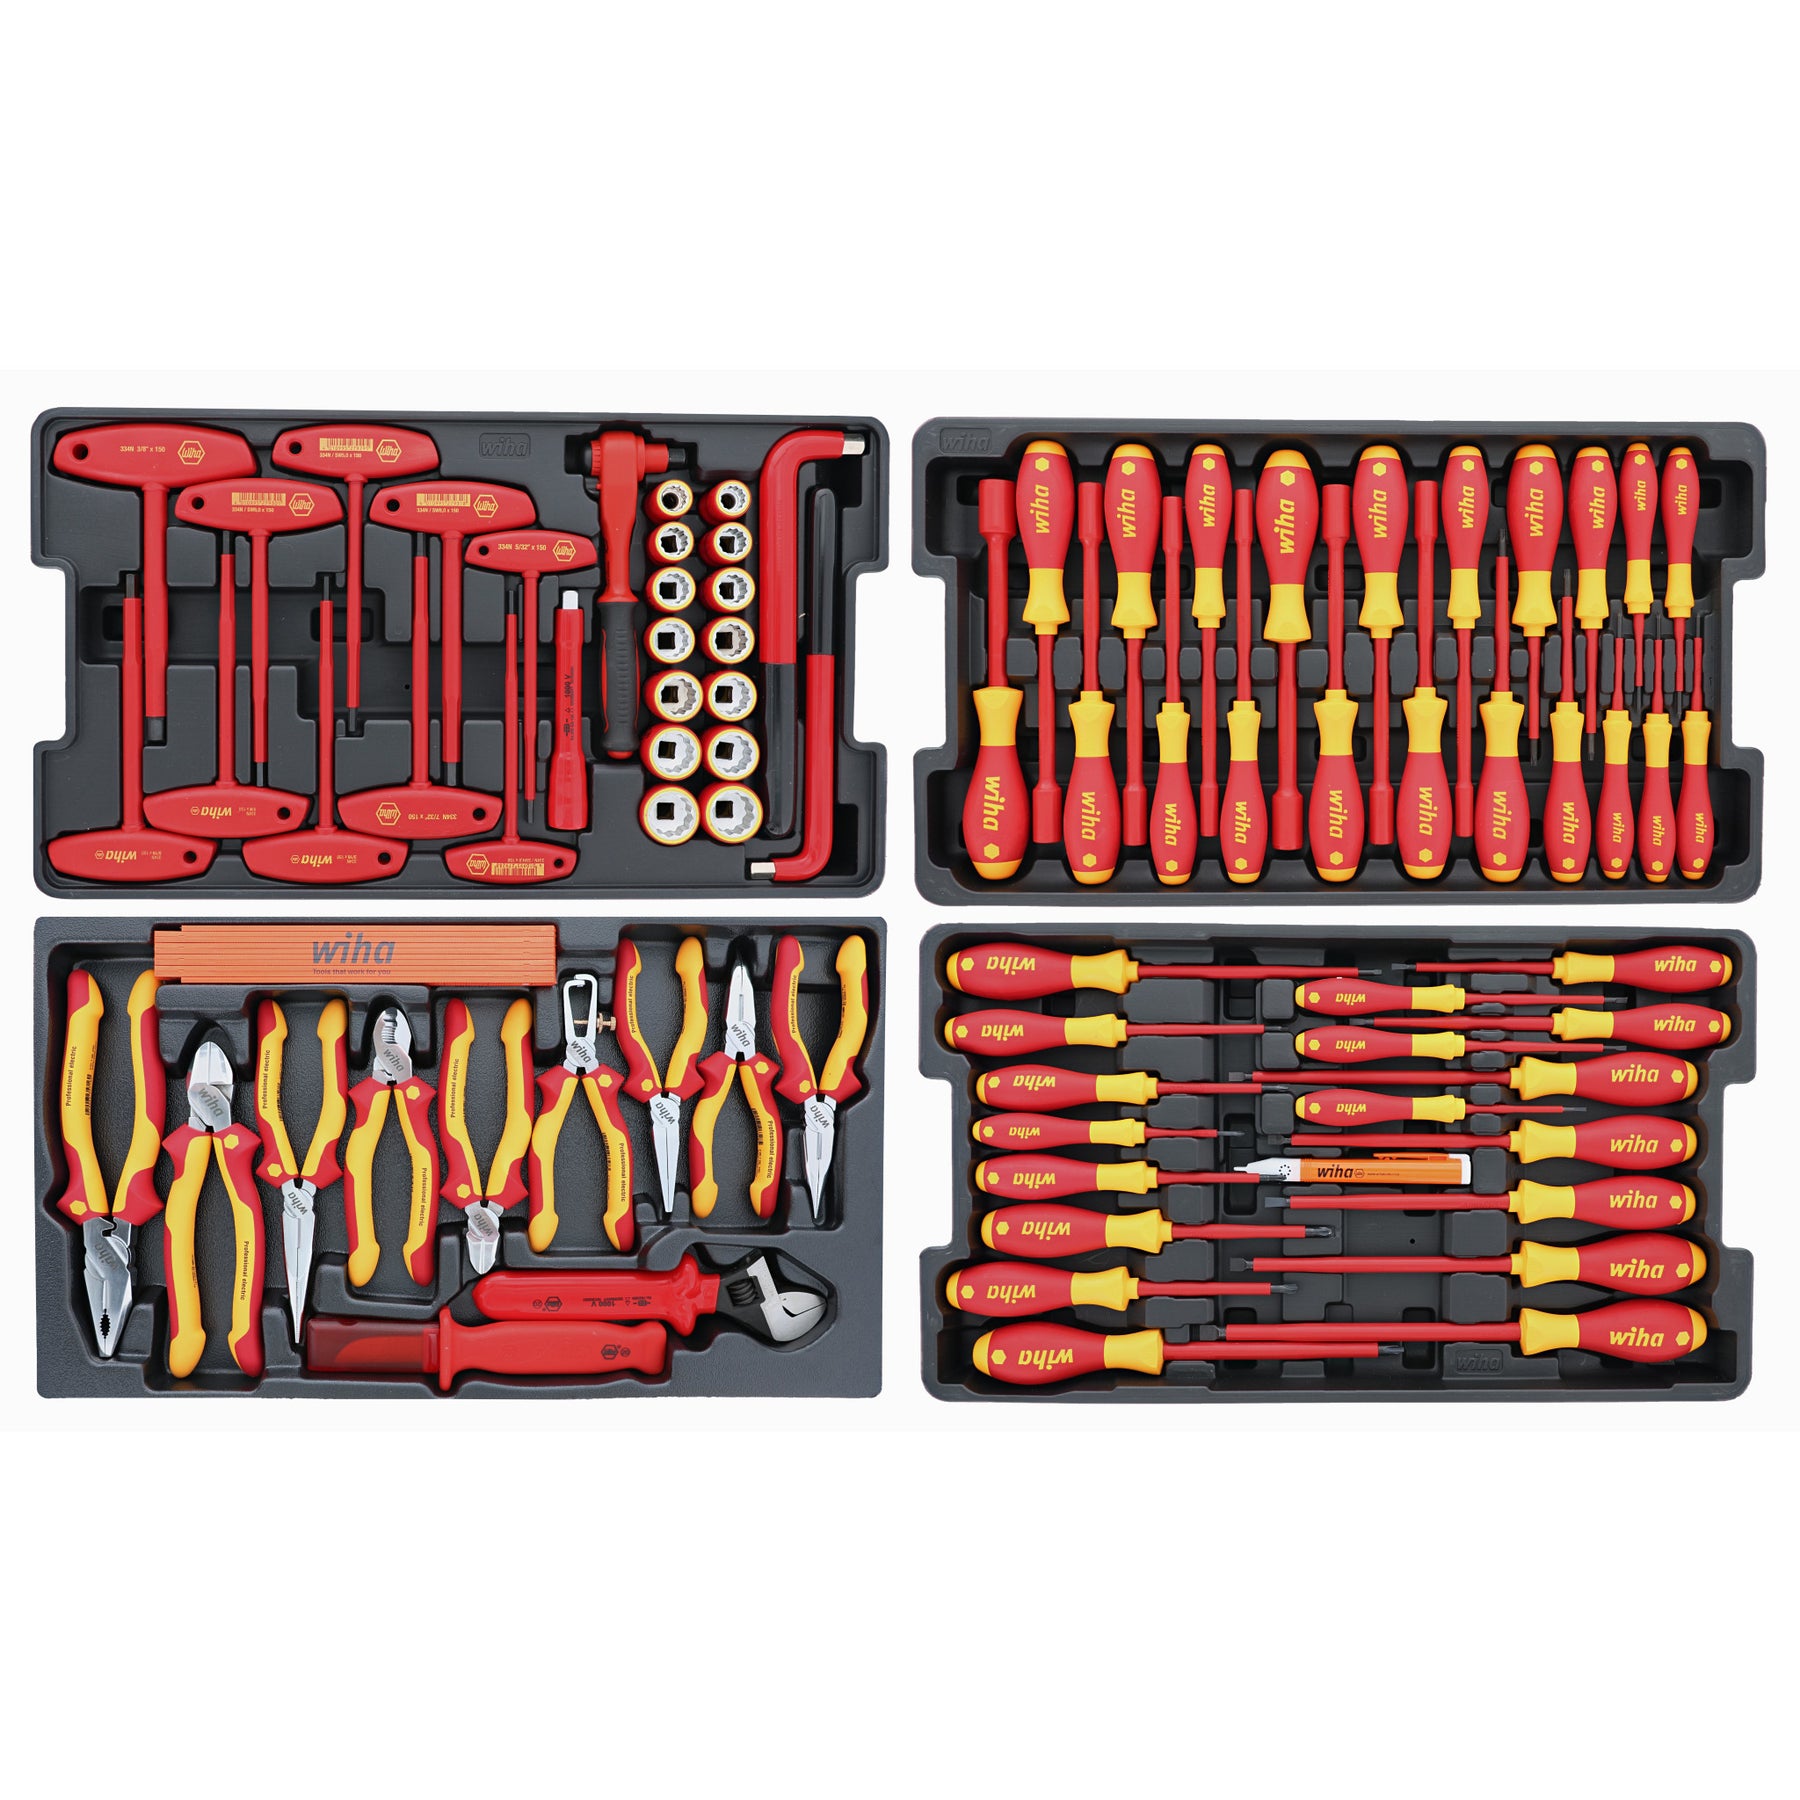 112 Piece Master Electrician's Insulated Tools Set In Rolling Hard Case